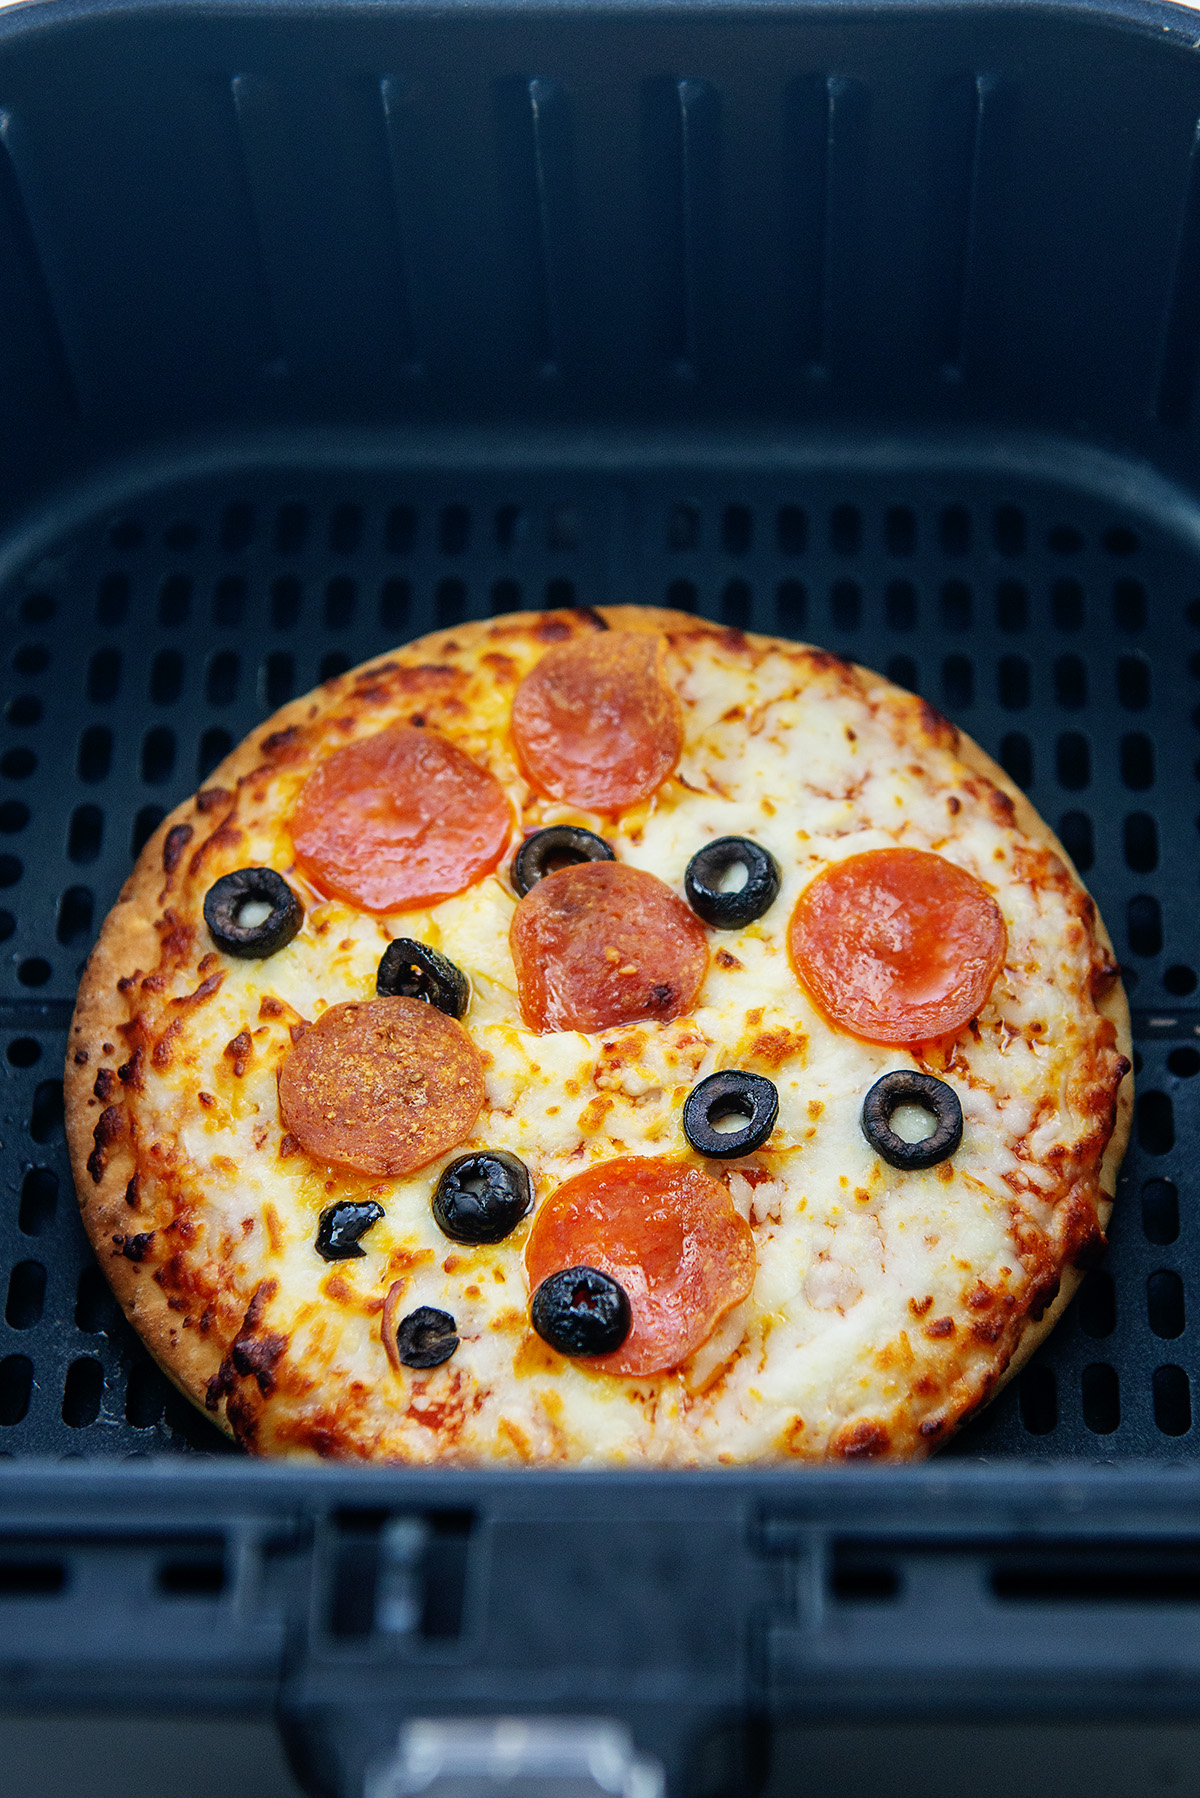 A cooked pepperoni and olive pizza in an air fryer basket.